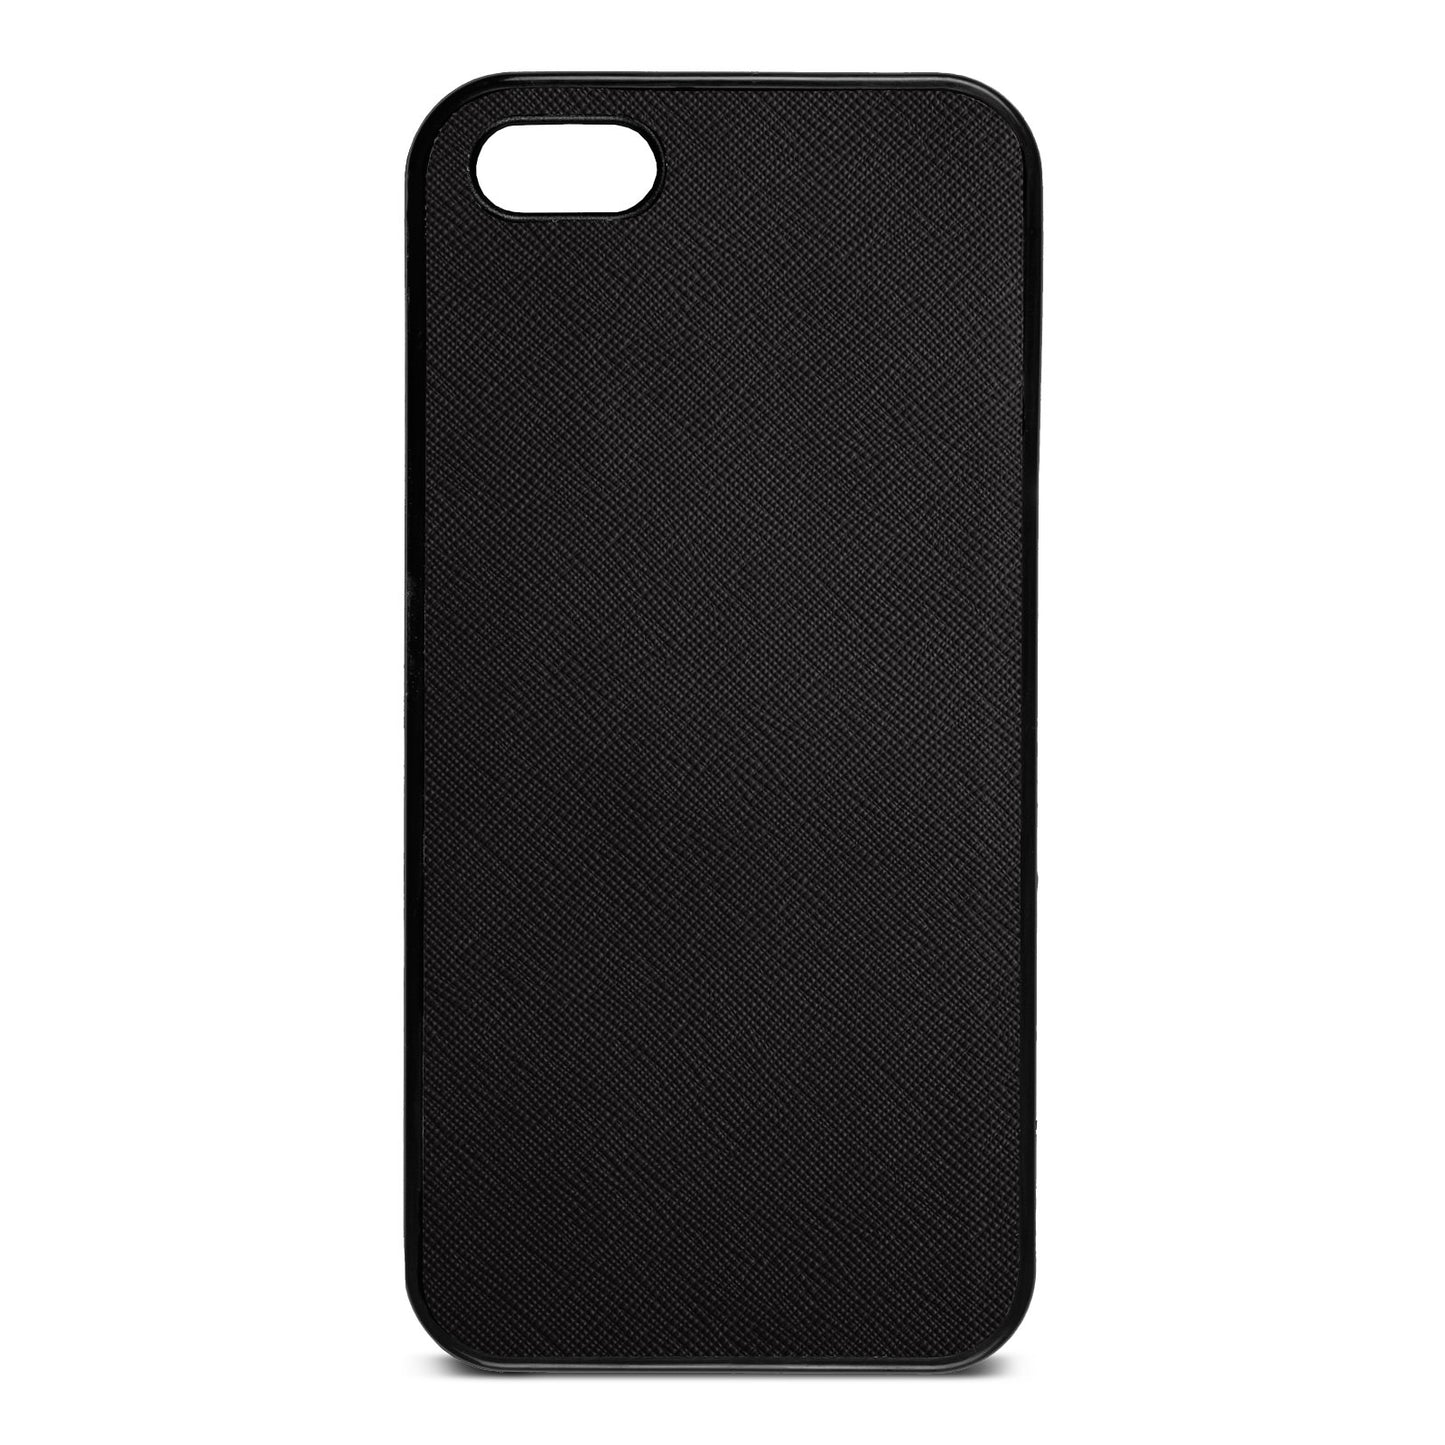 Blank iPhone 5 Drop Shadow Black Leather Case